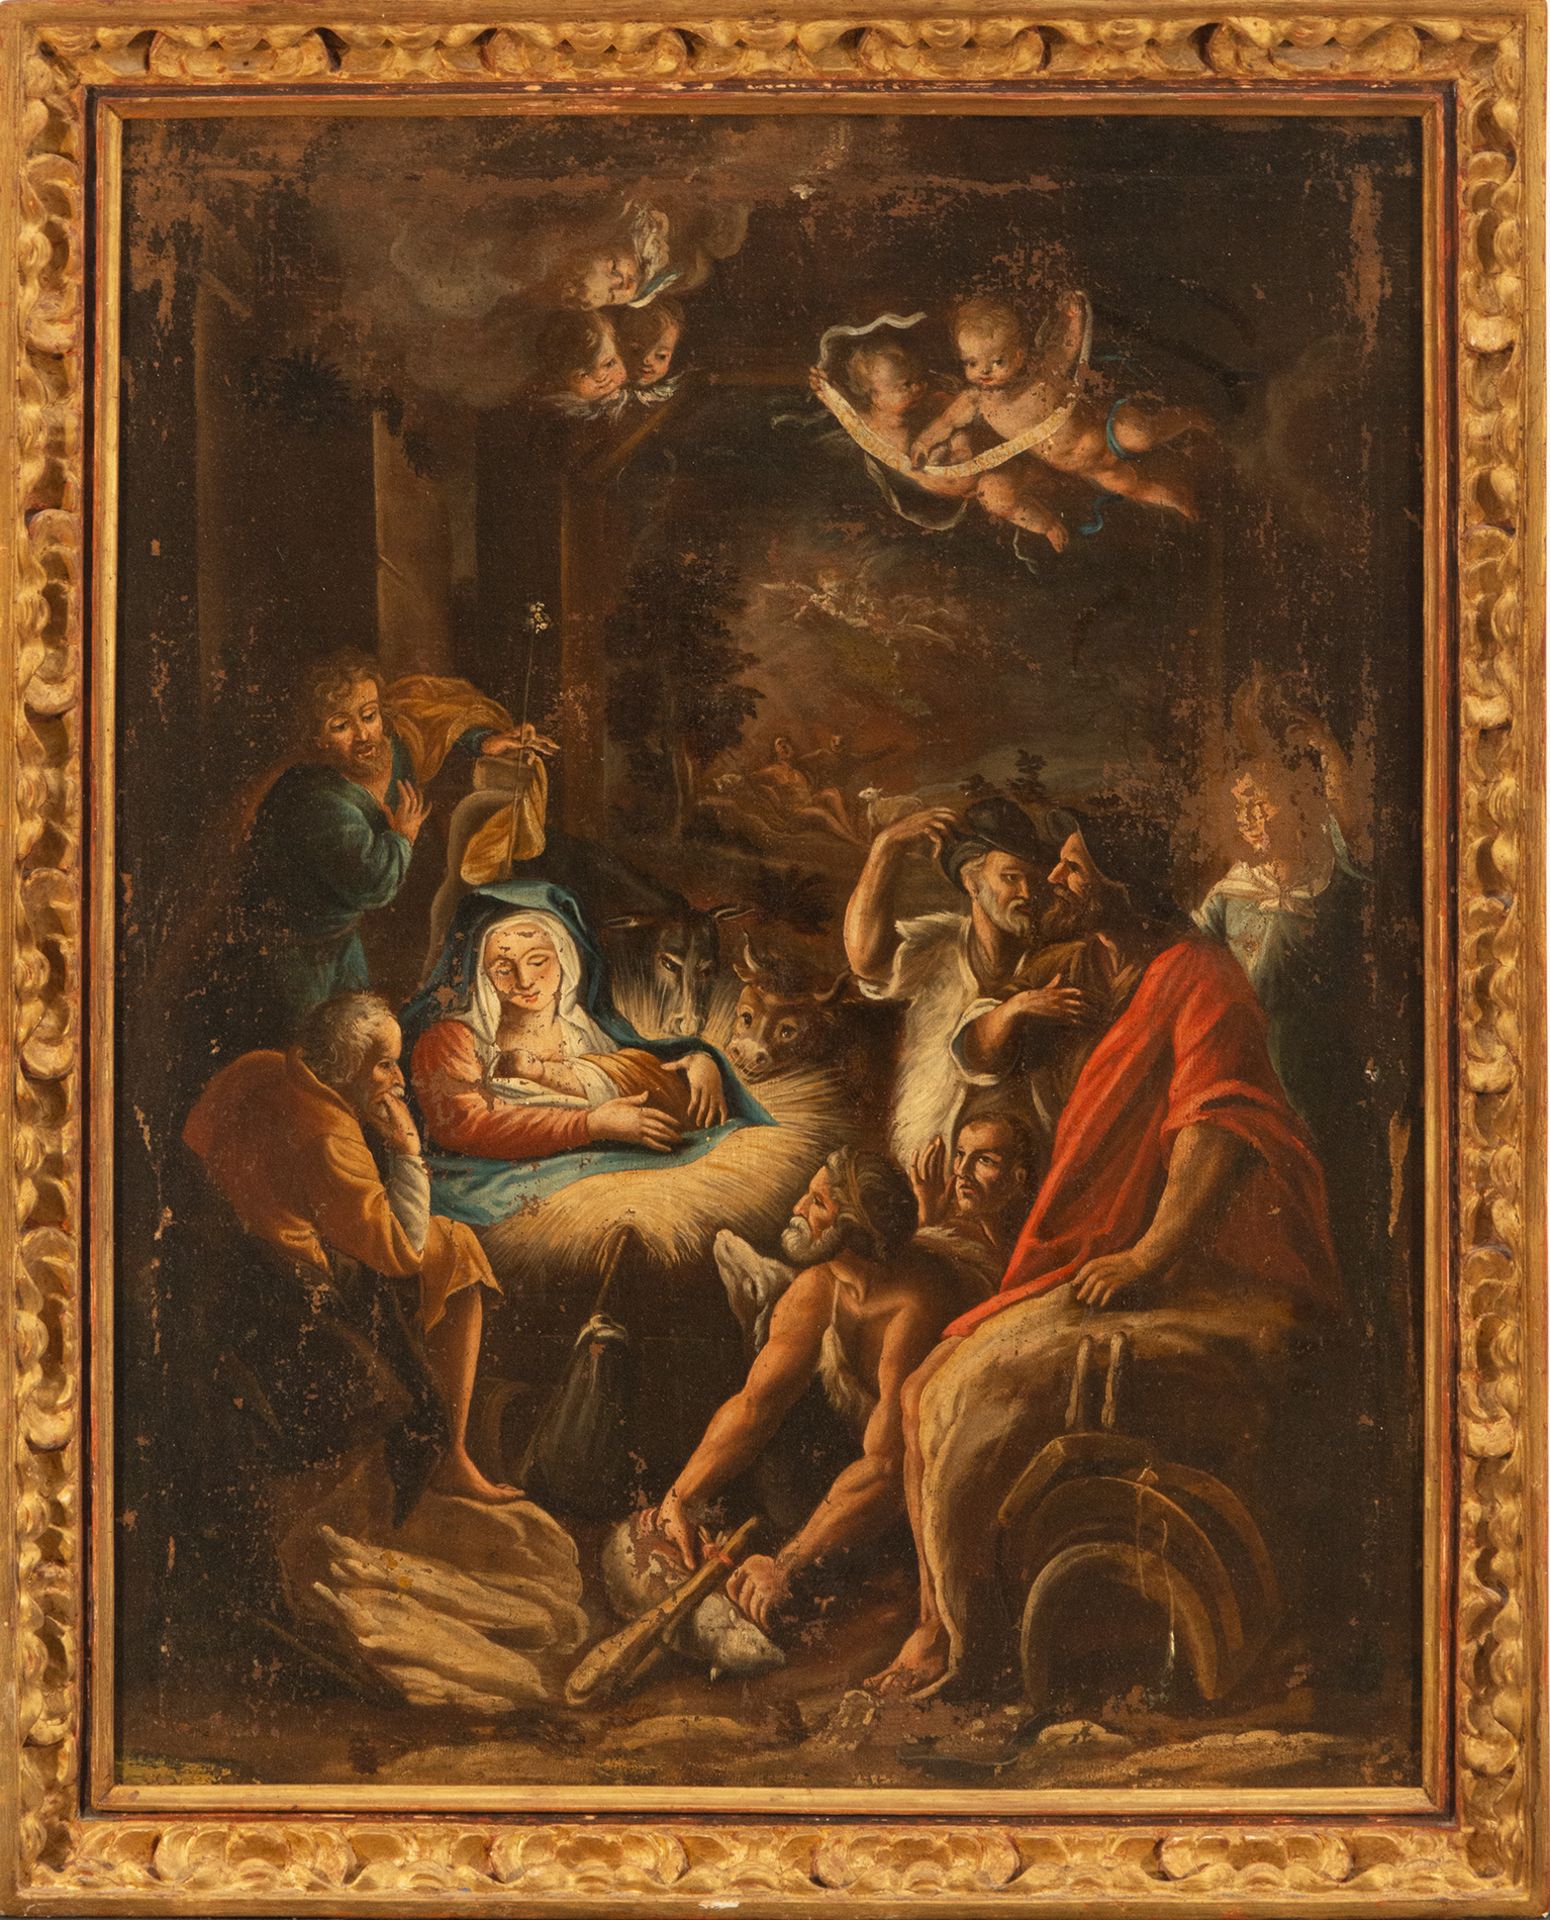 Adoration of the Shepherds, Italian school of the 17th century, follower of the Bassano brothers